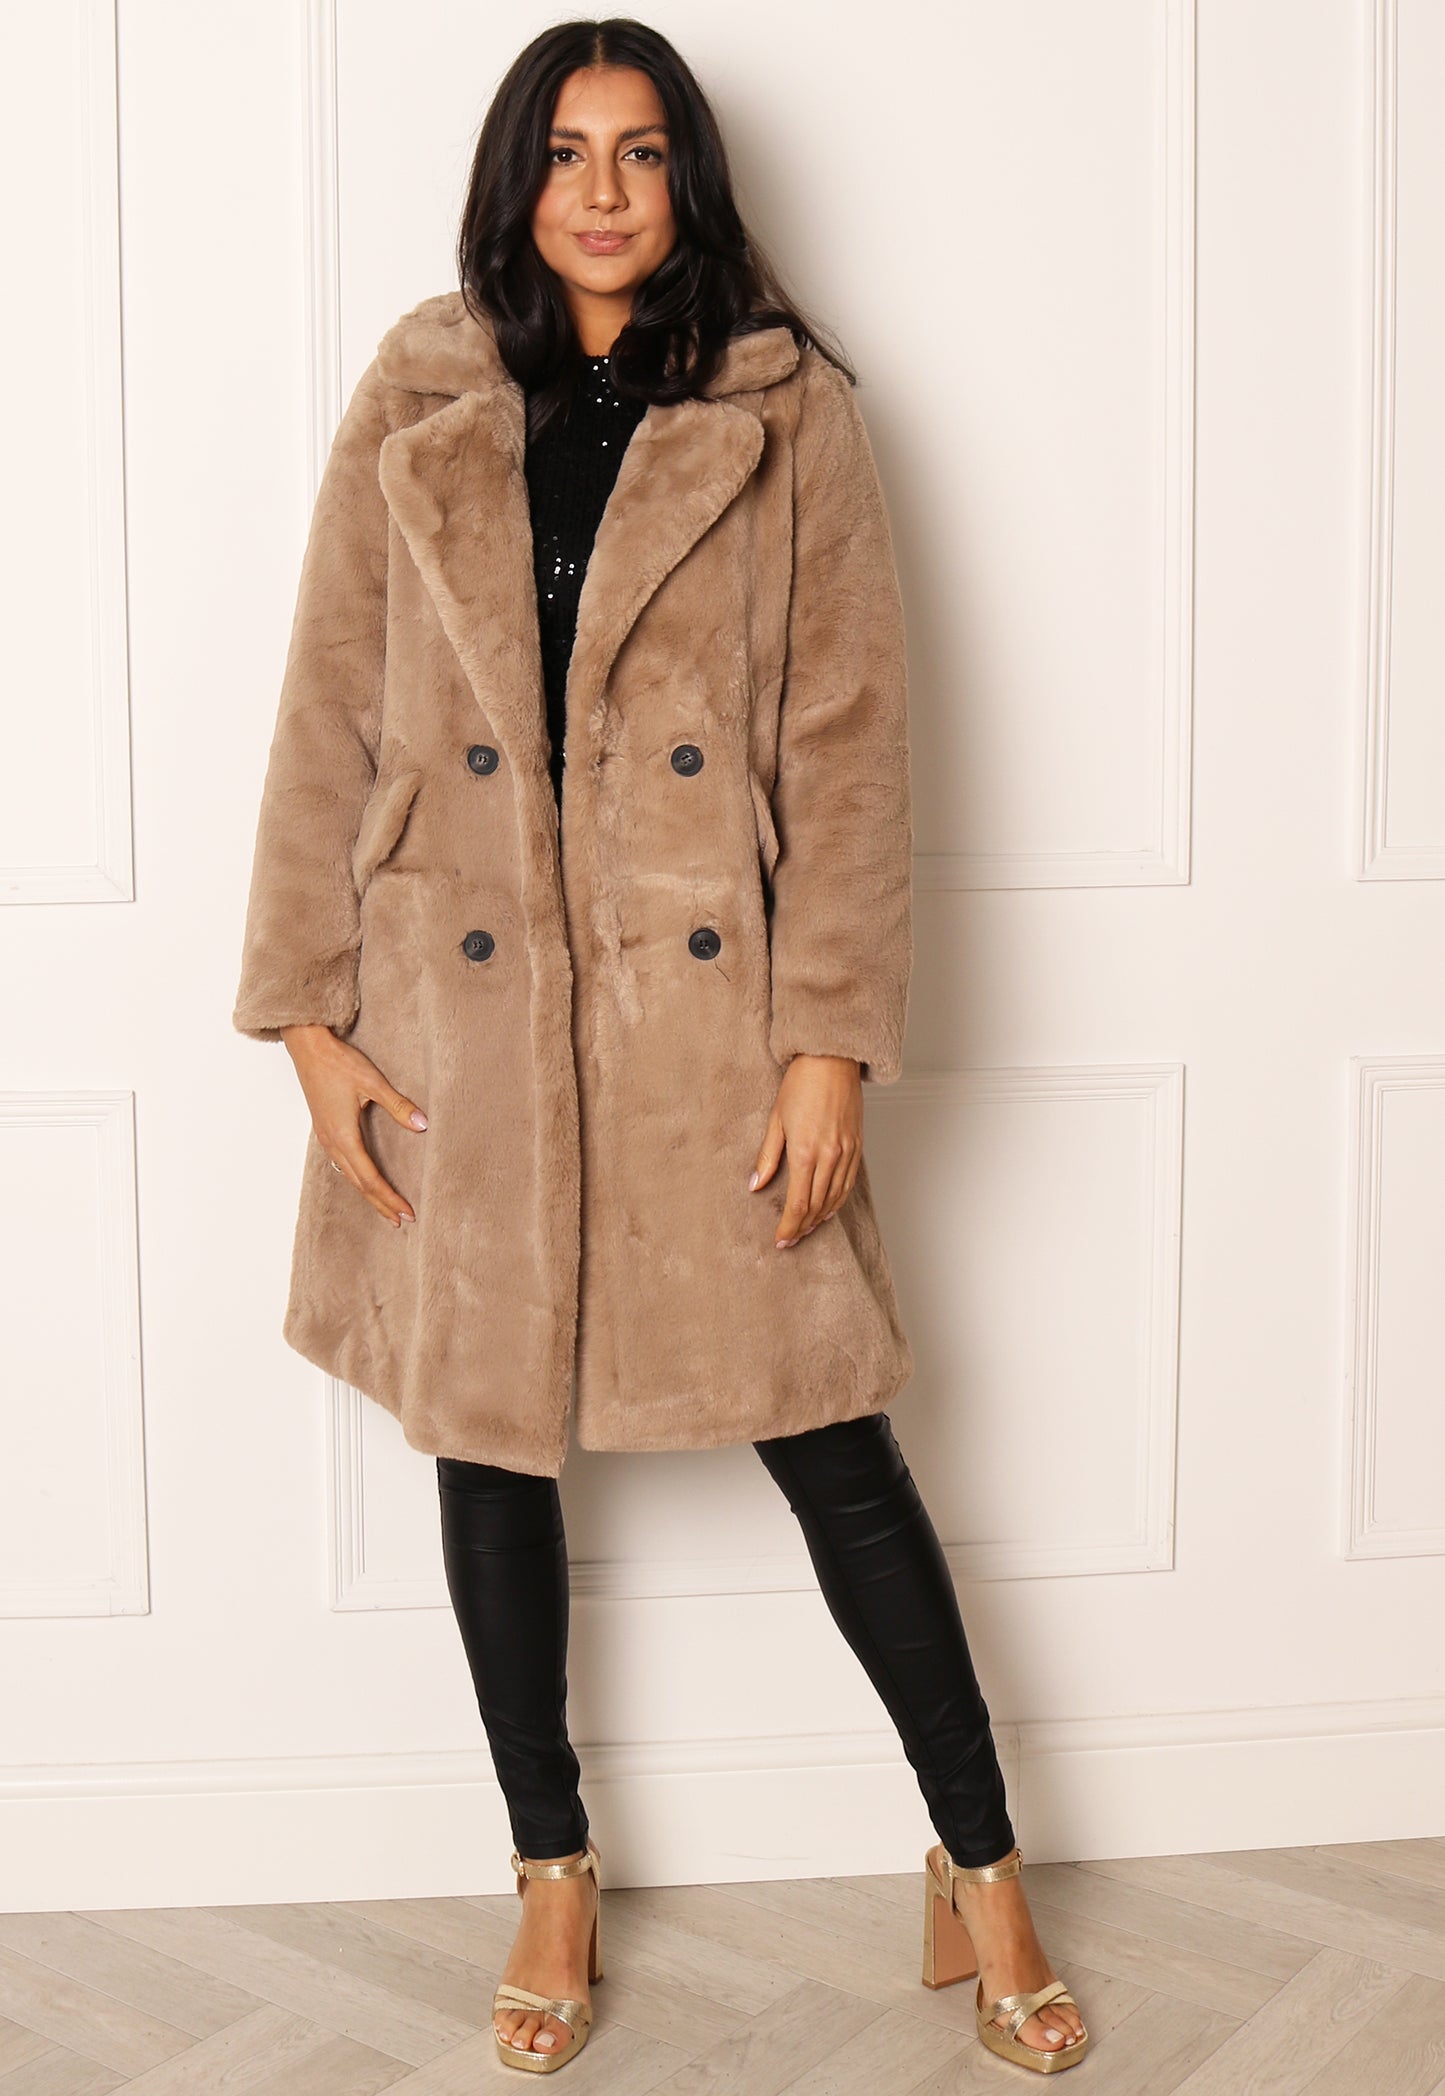 VERO Elly Double Style Faux Fur Midi Coat with Collar in Beige | One Nation Clothing VERO MODA Elly Double Breasted Vintage Style Faux Fur Midi Coat with C